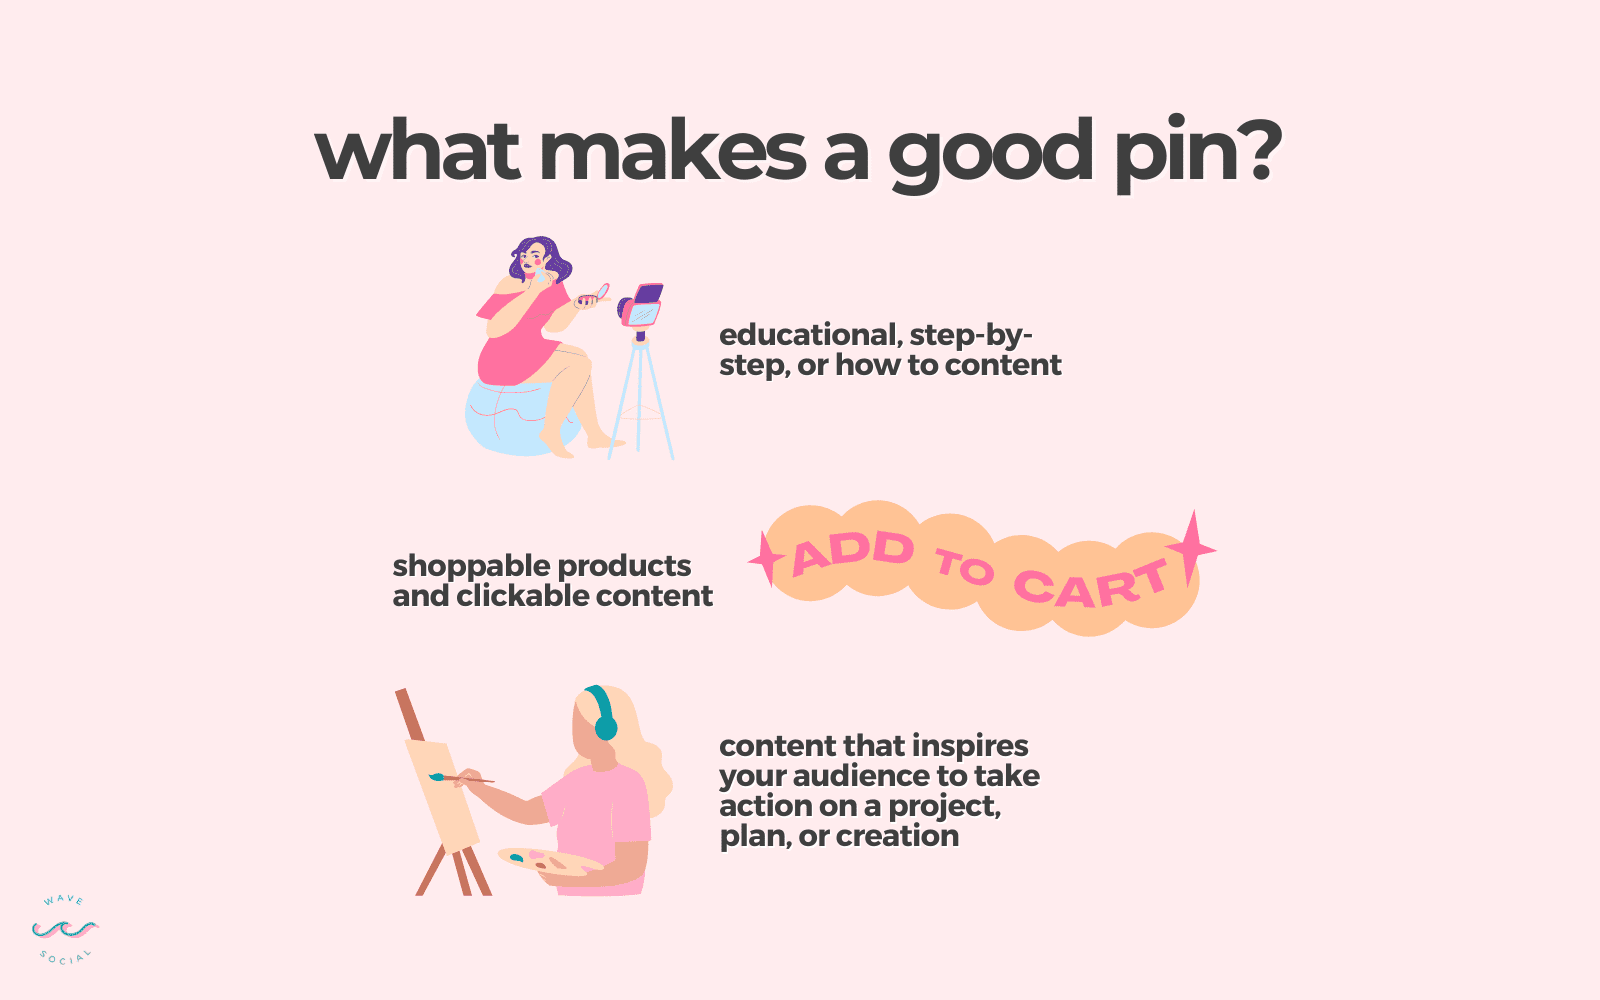 graphic that shows what makes a good pinterest post: educational, step by step, or how to content, Shoppable products and clickable content, or content that inspires your audience to take action on a project, plan, or creation